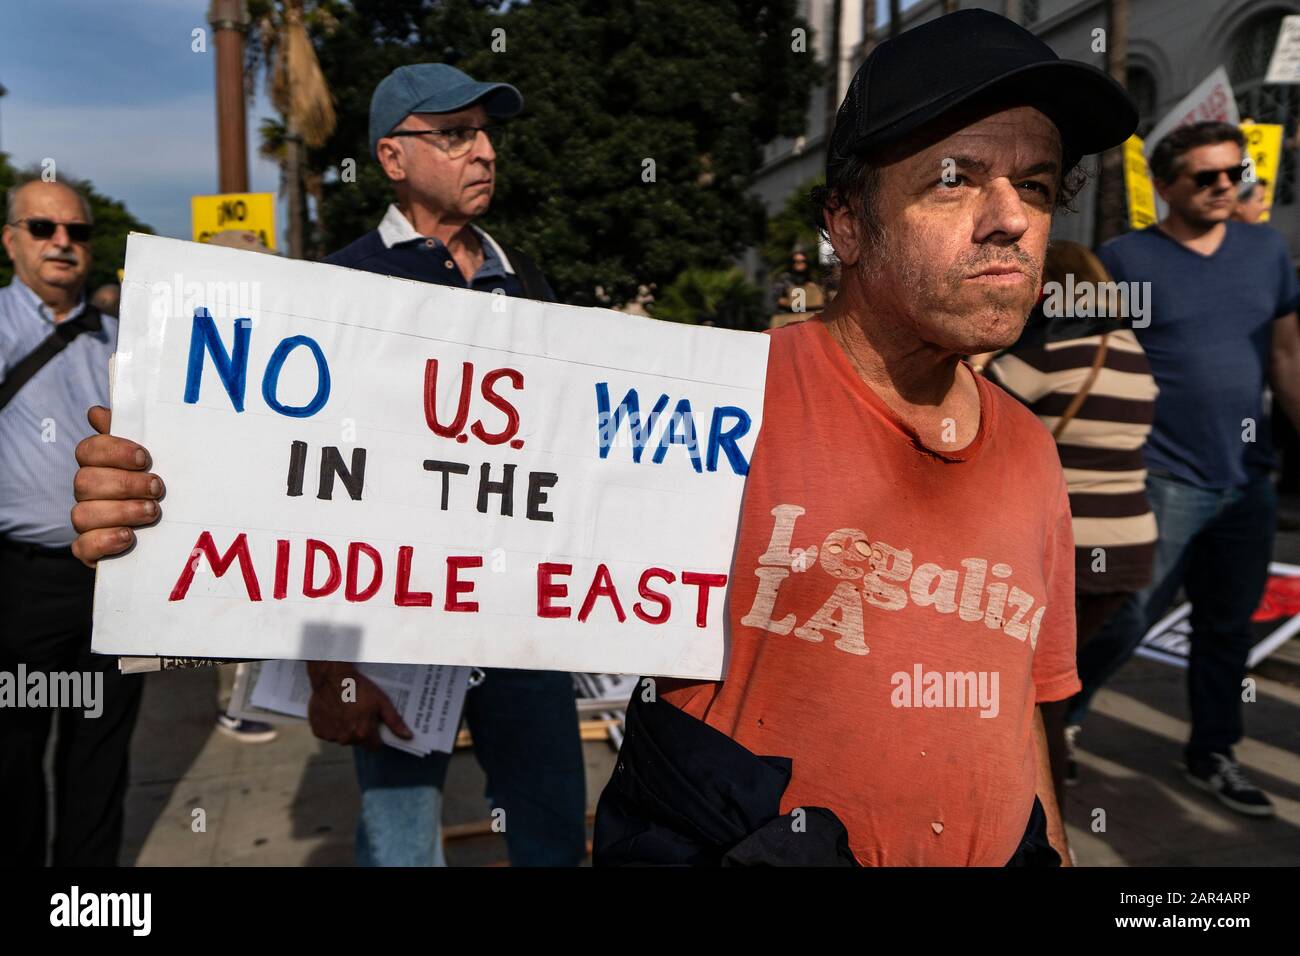 A protester holds a placard during the demonstration.No War in Iran protest against the Trump Administration’s military actions and economic sanctions against Iran. Organizers called on Trump to withdraw U.S. troops from Iraq and not to drag the U.S. into a war in the Middle East. Stock Photo